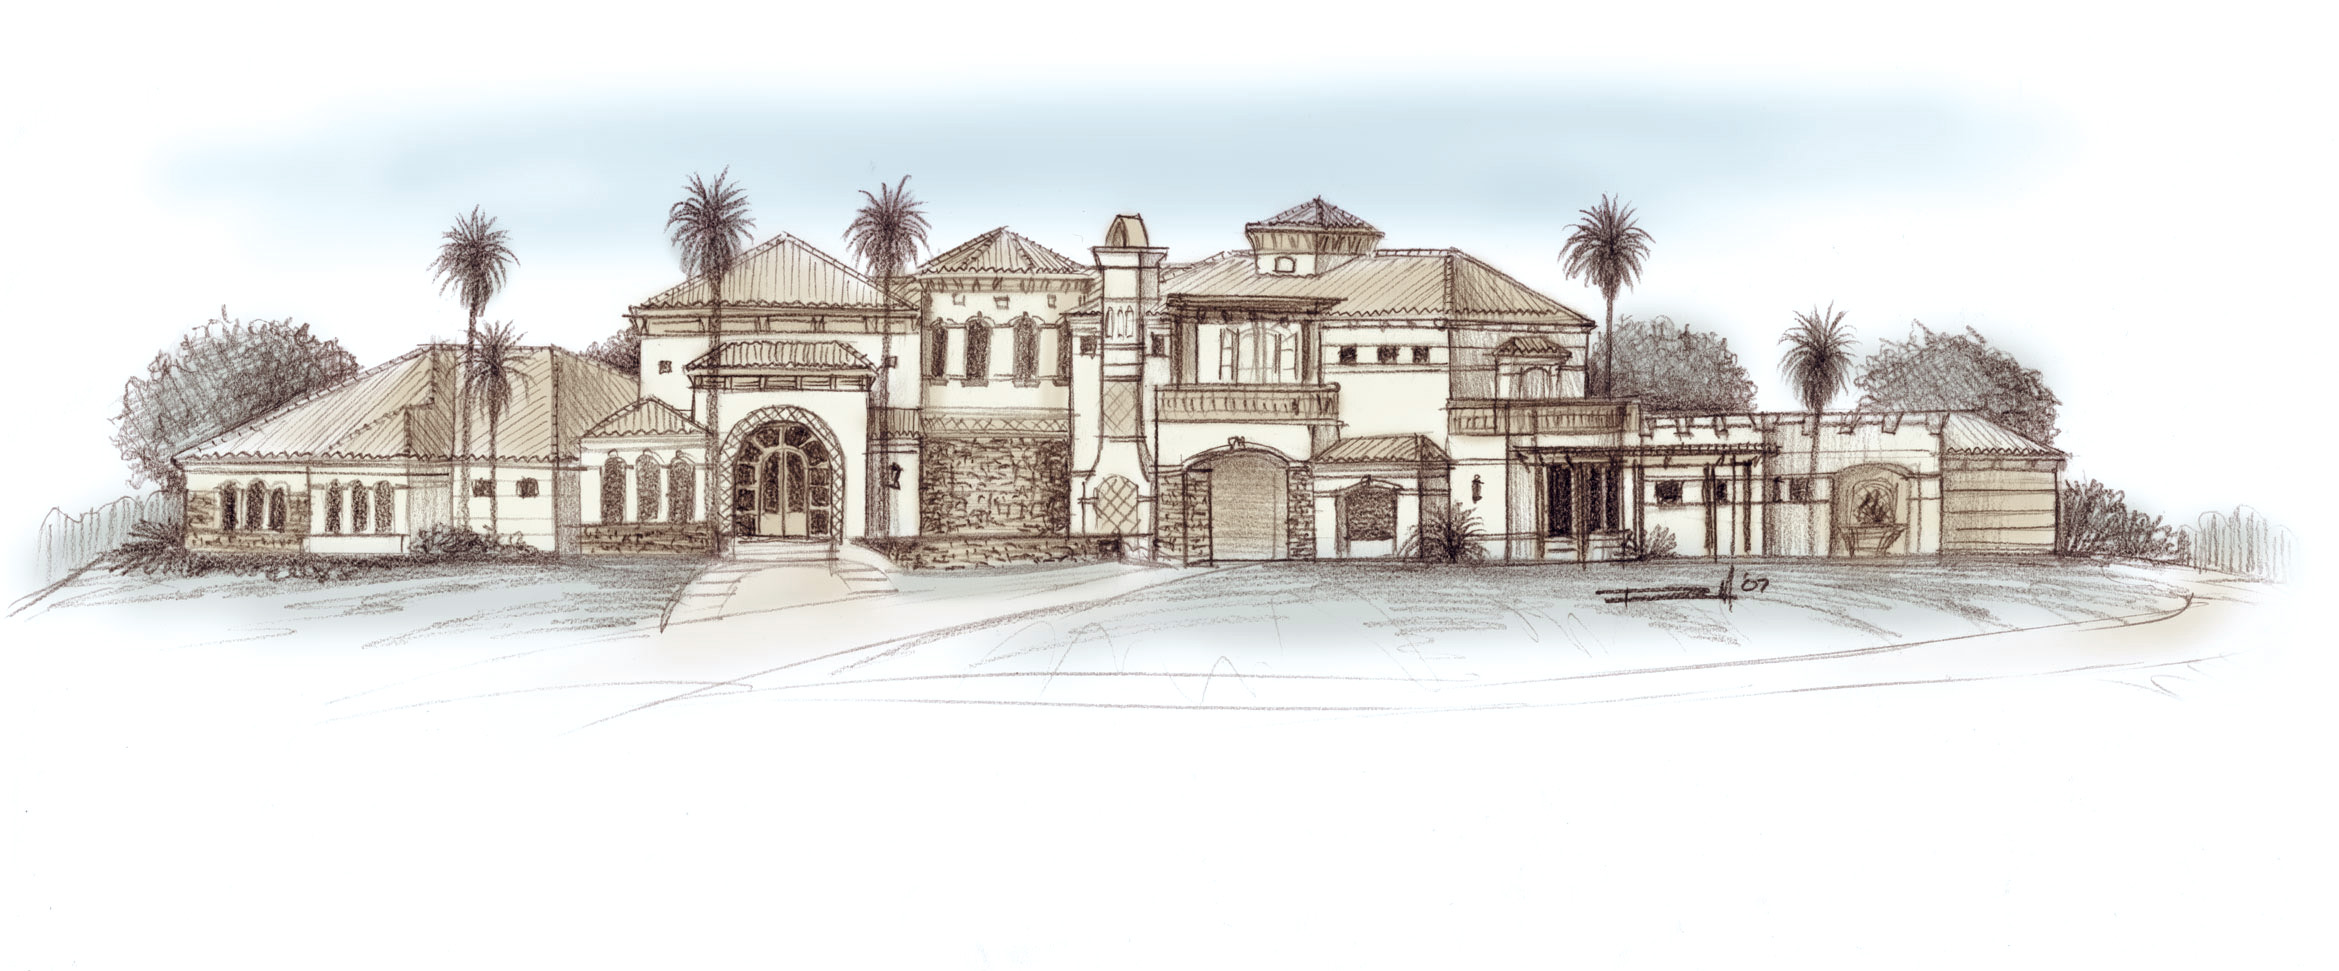 This is the preliminary sketch of the south elevation to a residence I designed.  The house is going in the San Diego area.